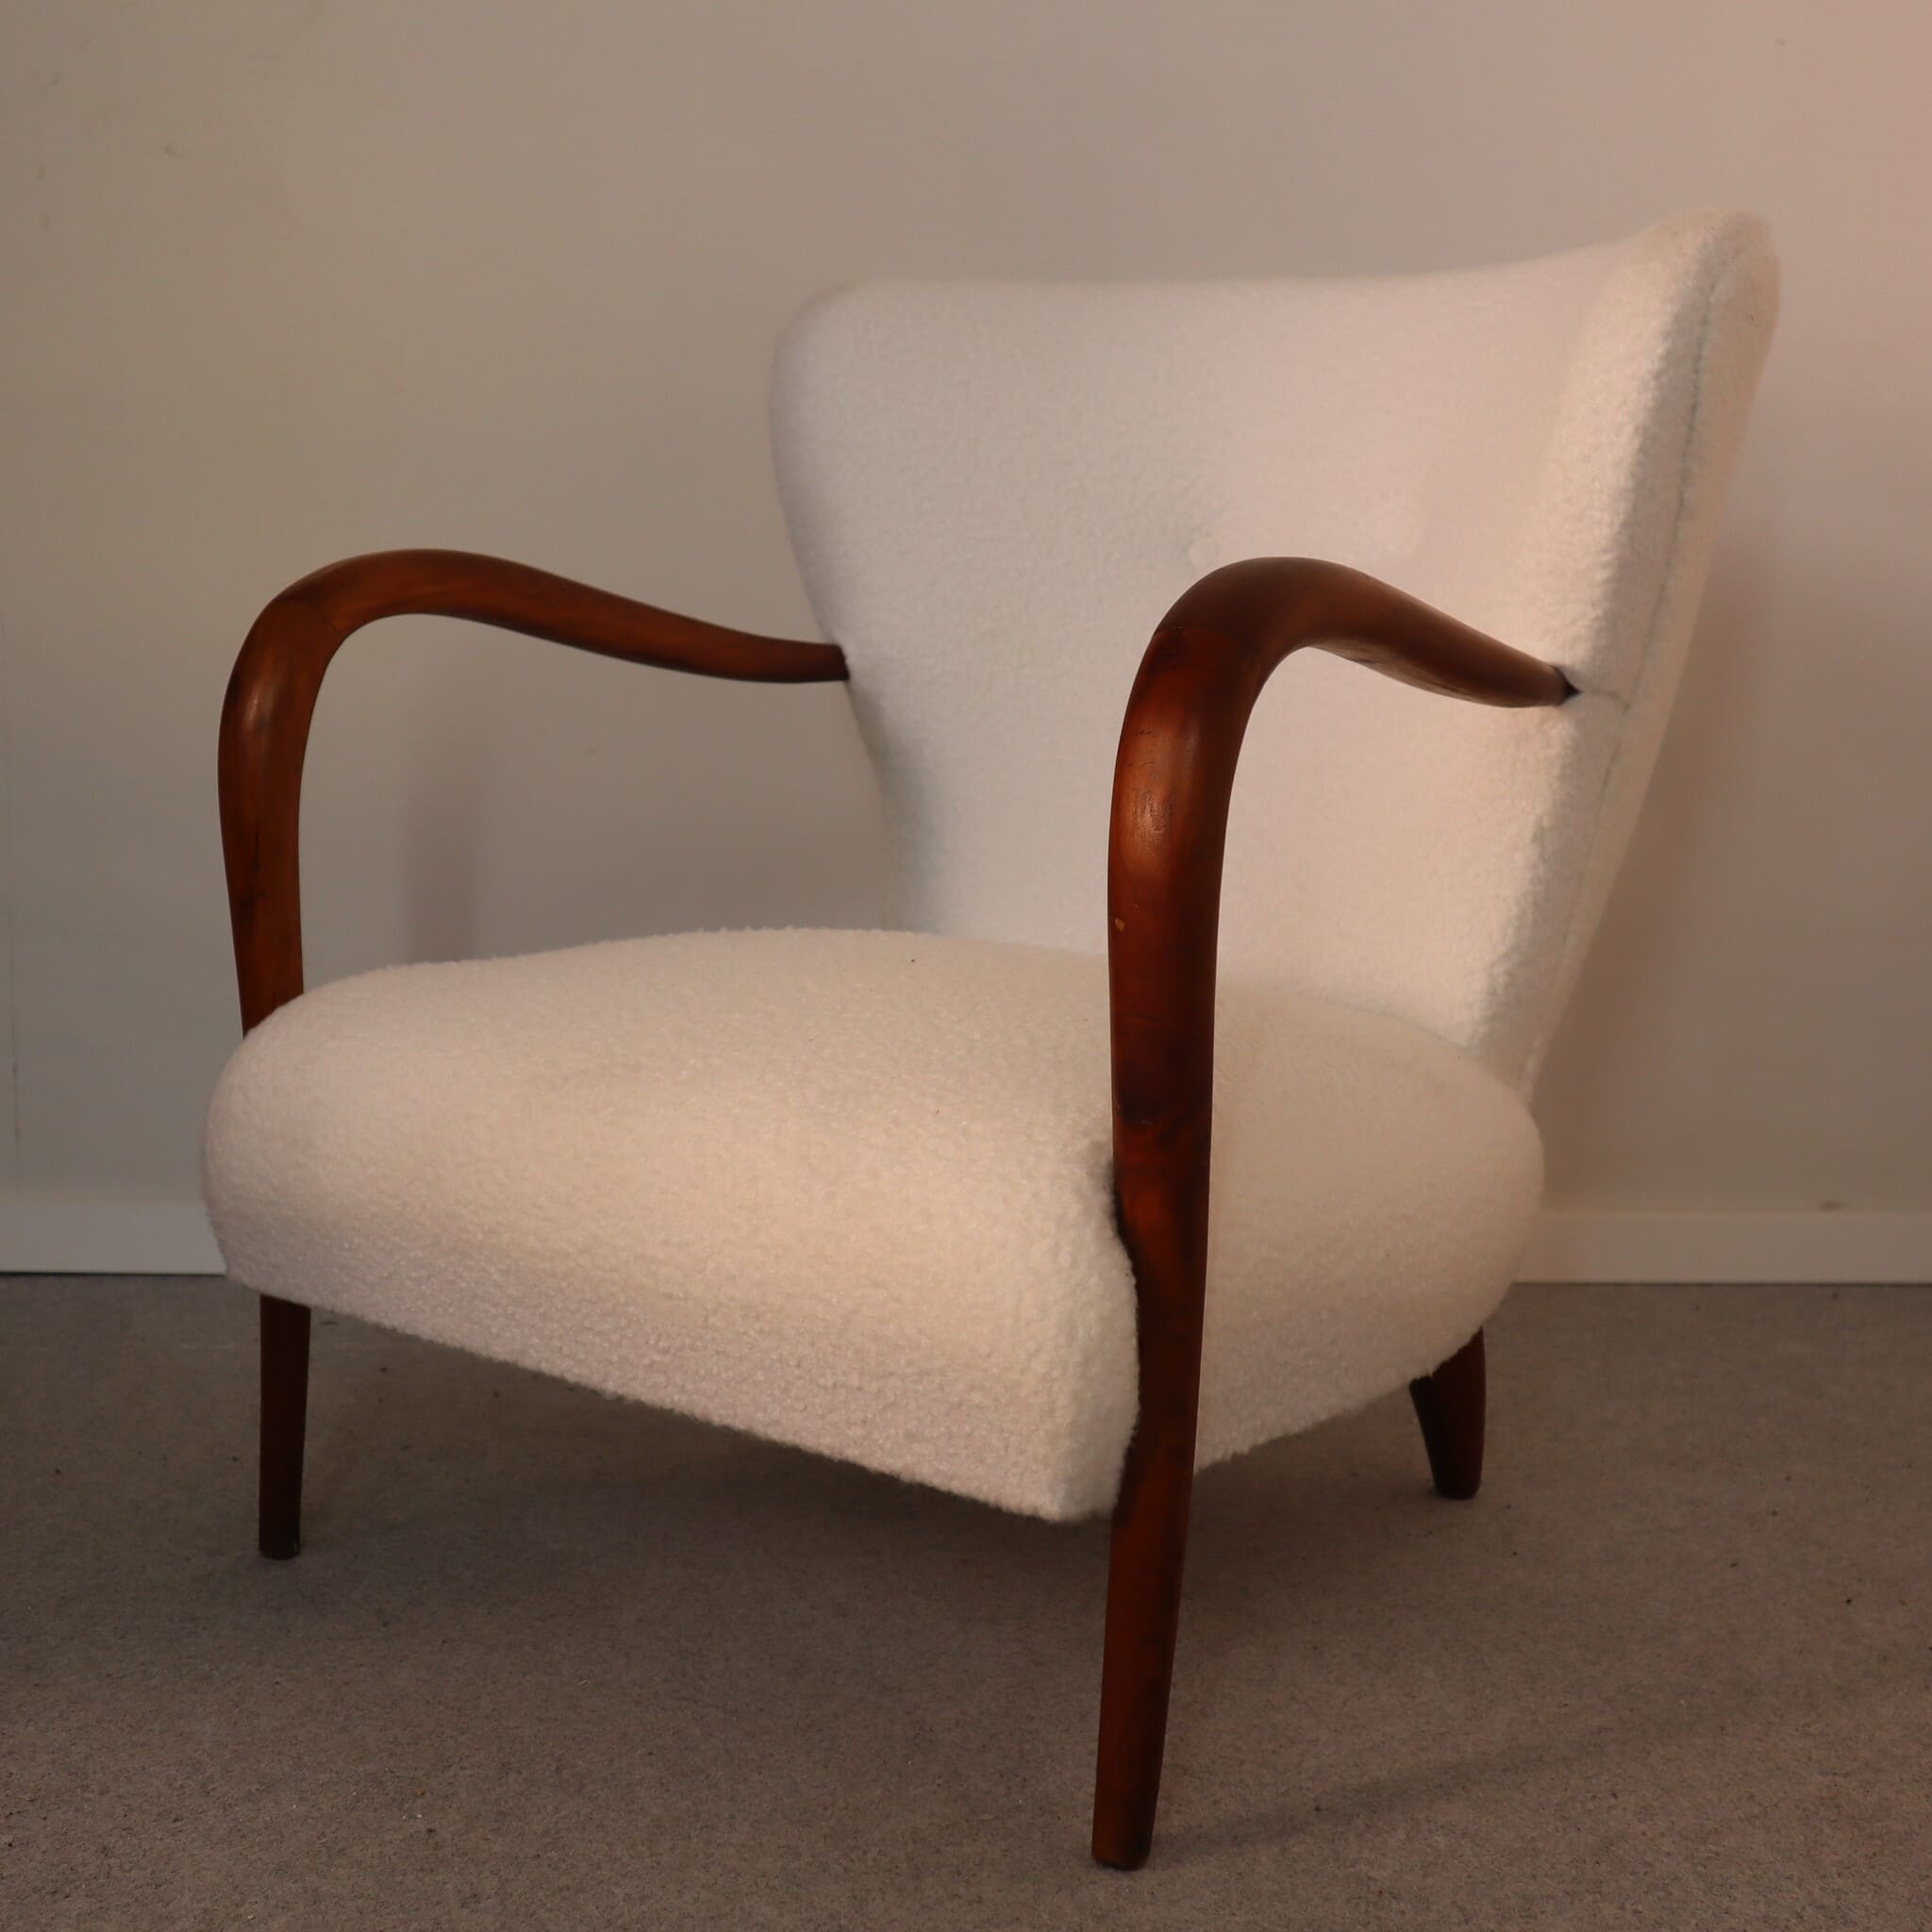 visionidepoca-modern-old-armchair-40s-white-boucle-fabric-cherry-wood-structure-vintage-armchair